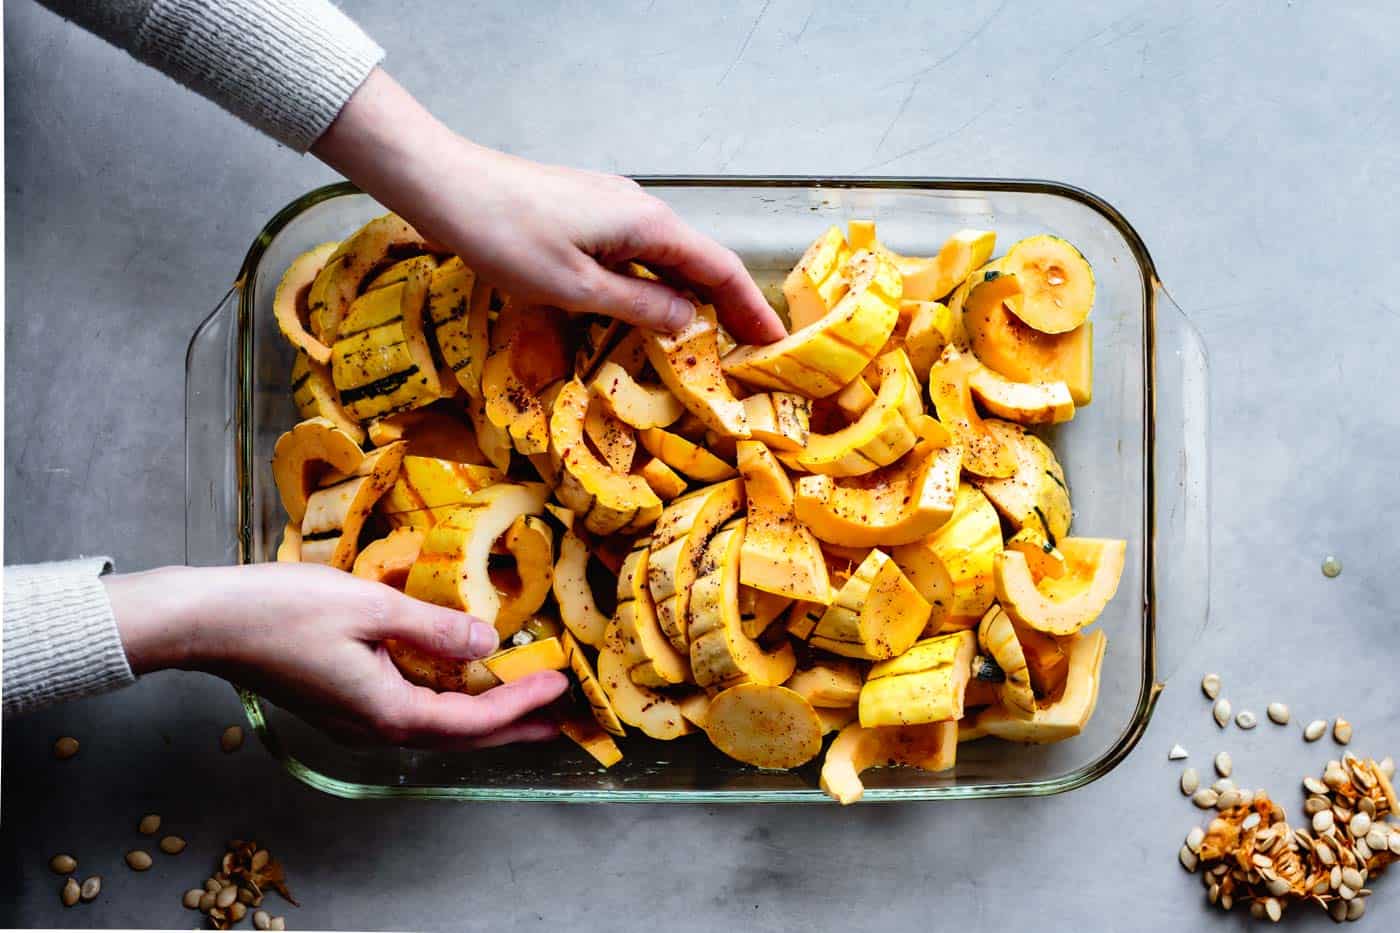 tossing delicata squash with brown butter and spices